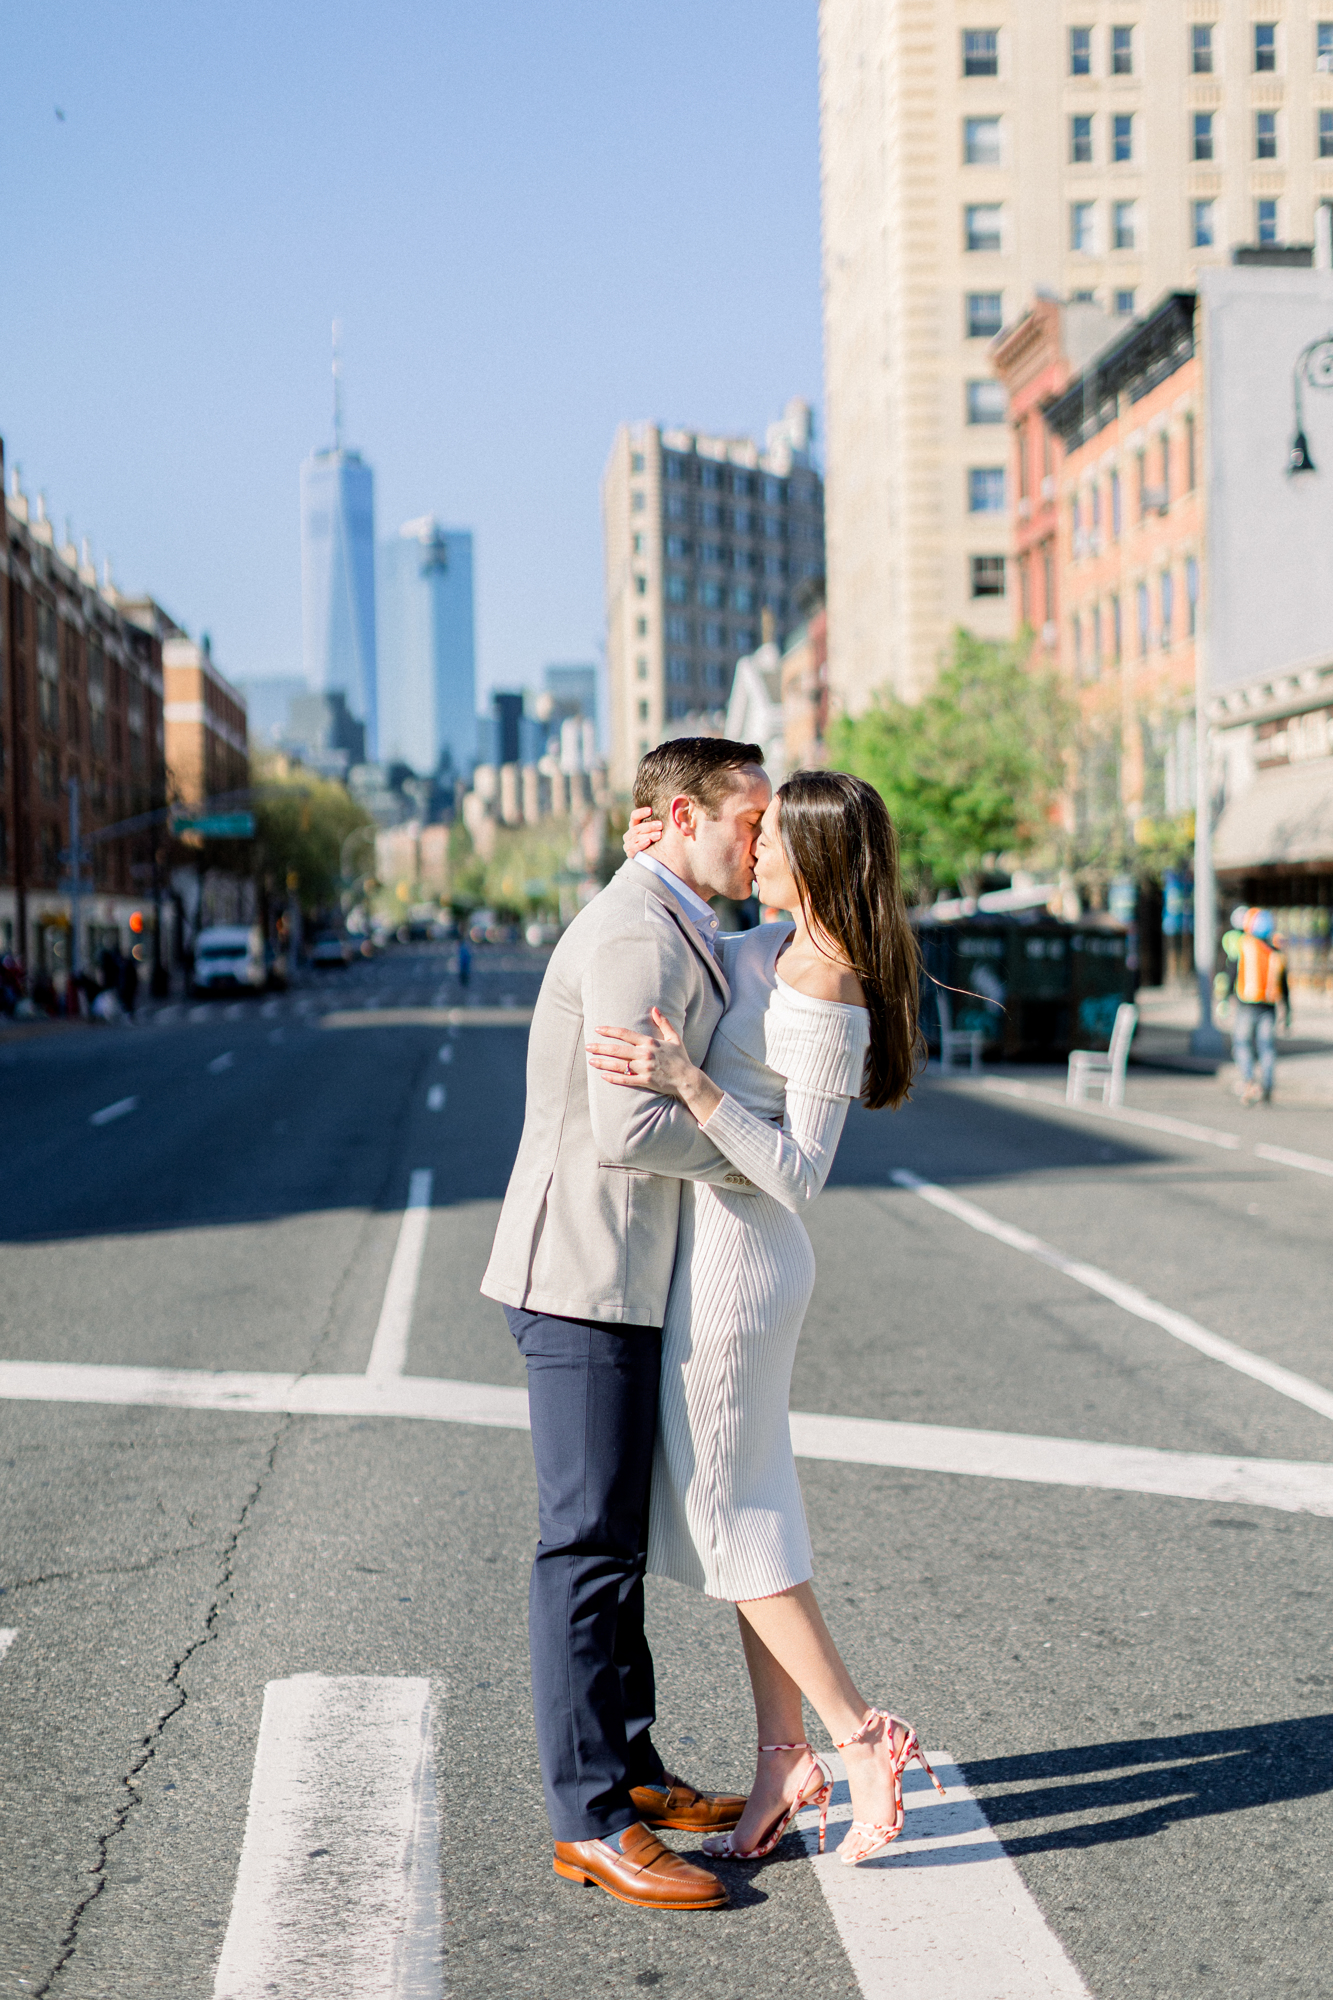 Intimate Spring Engagement Photos in Washington Square Park NYC